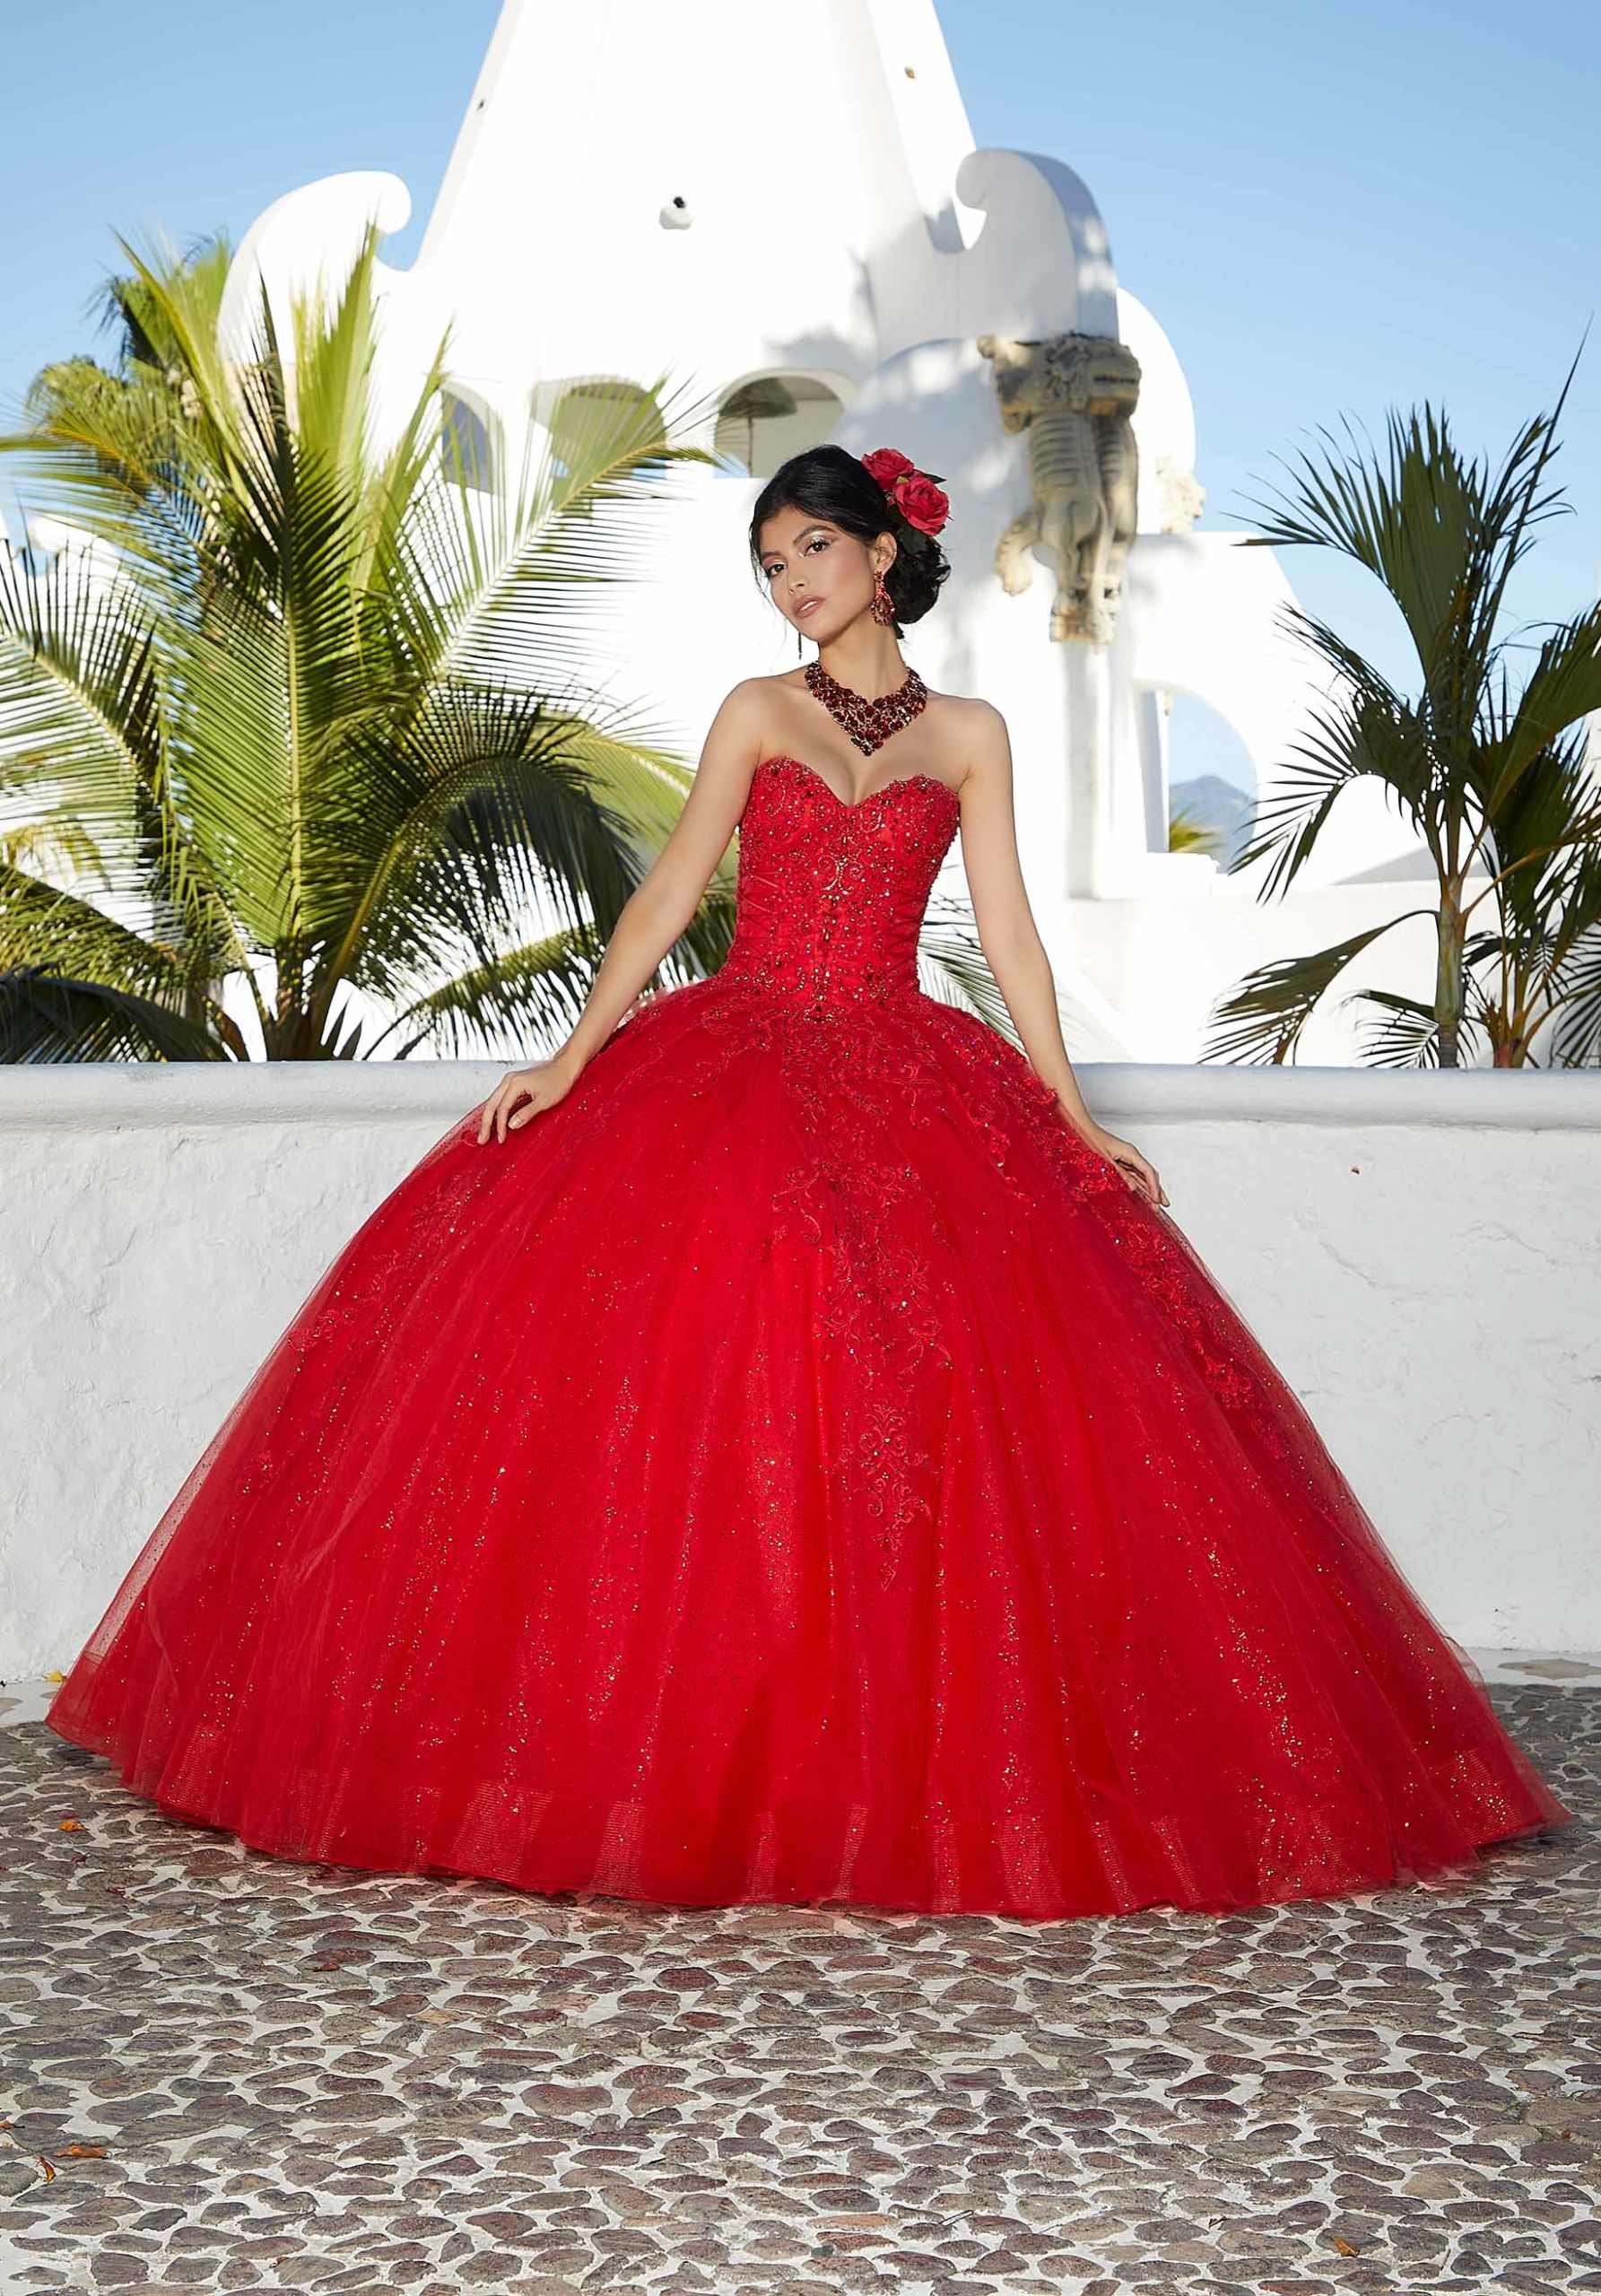 Morilee – Vizcaya 89359 – ⊛ Gala Gowns Store ⊛ for many occasions